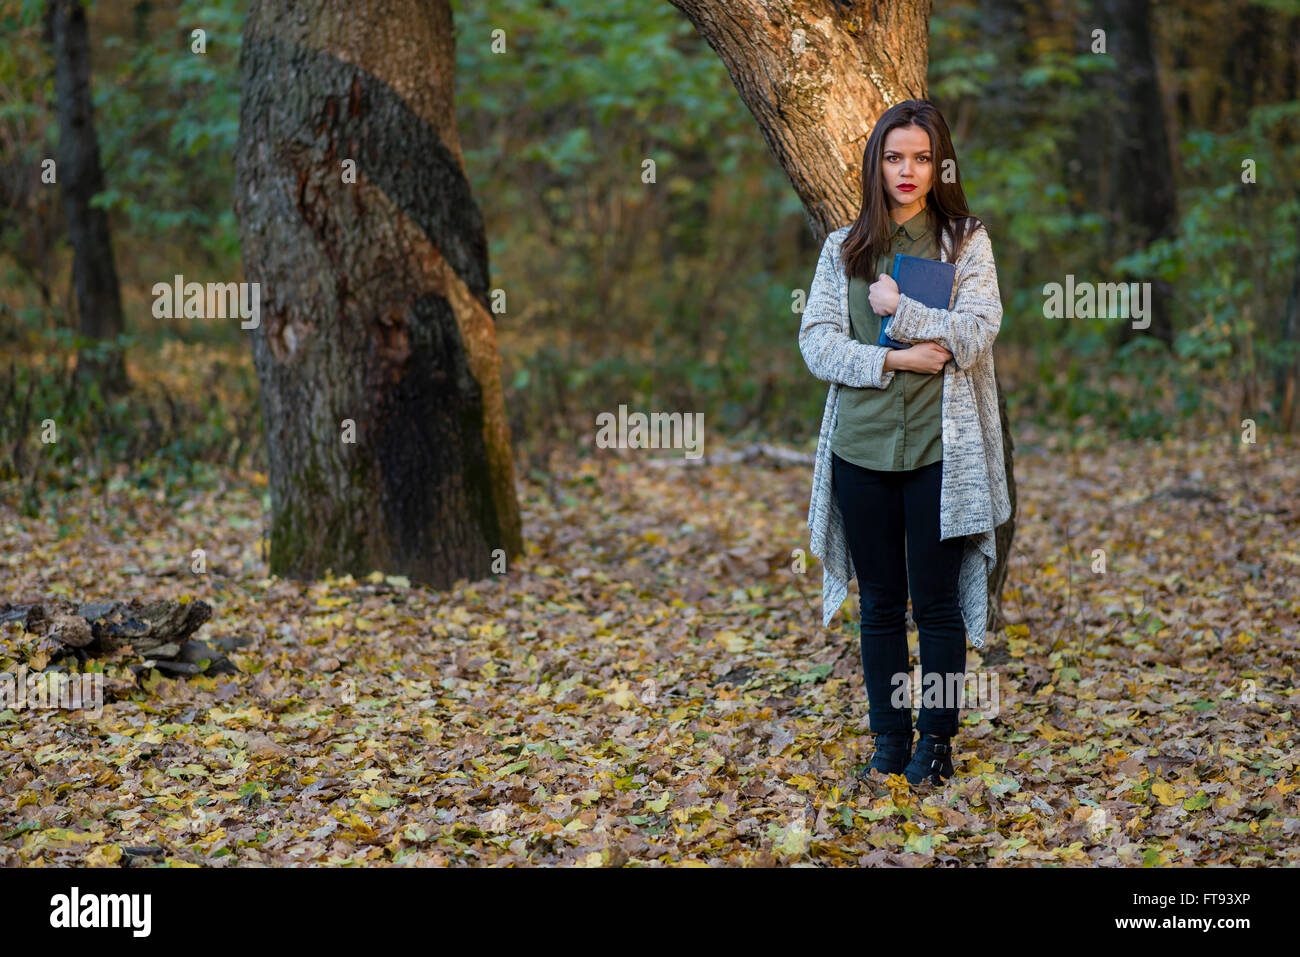 Scared by reading fairytales. A teenager girl is holding a book in an evening forest with two oak trees in the background. Stock Photo